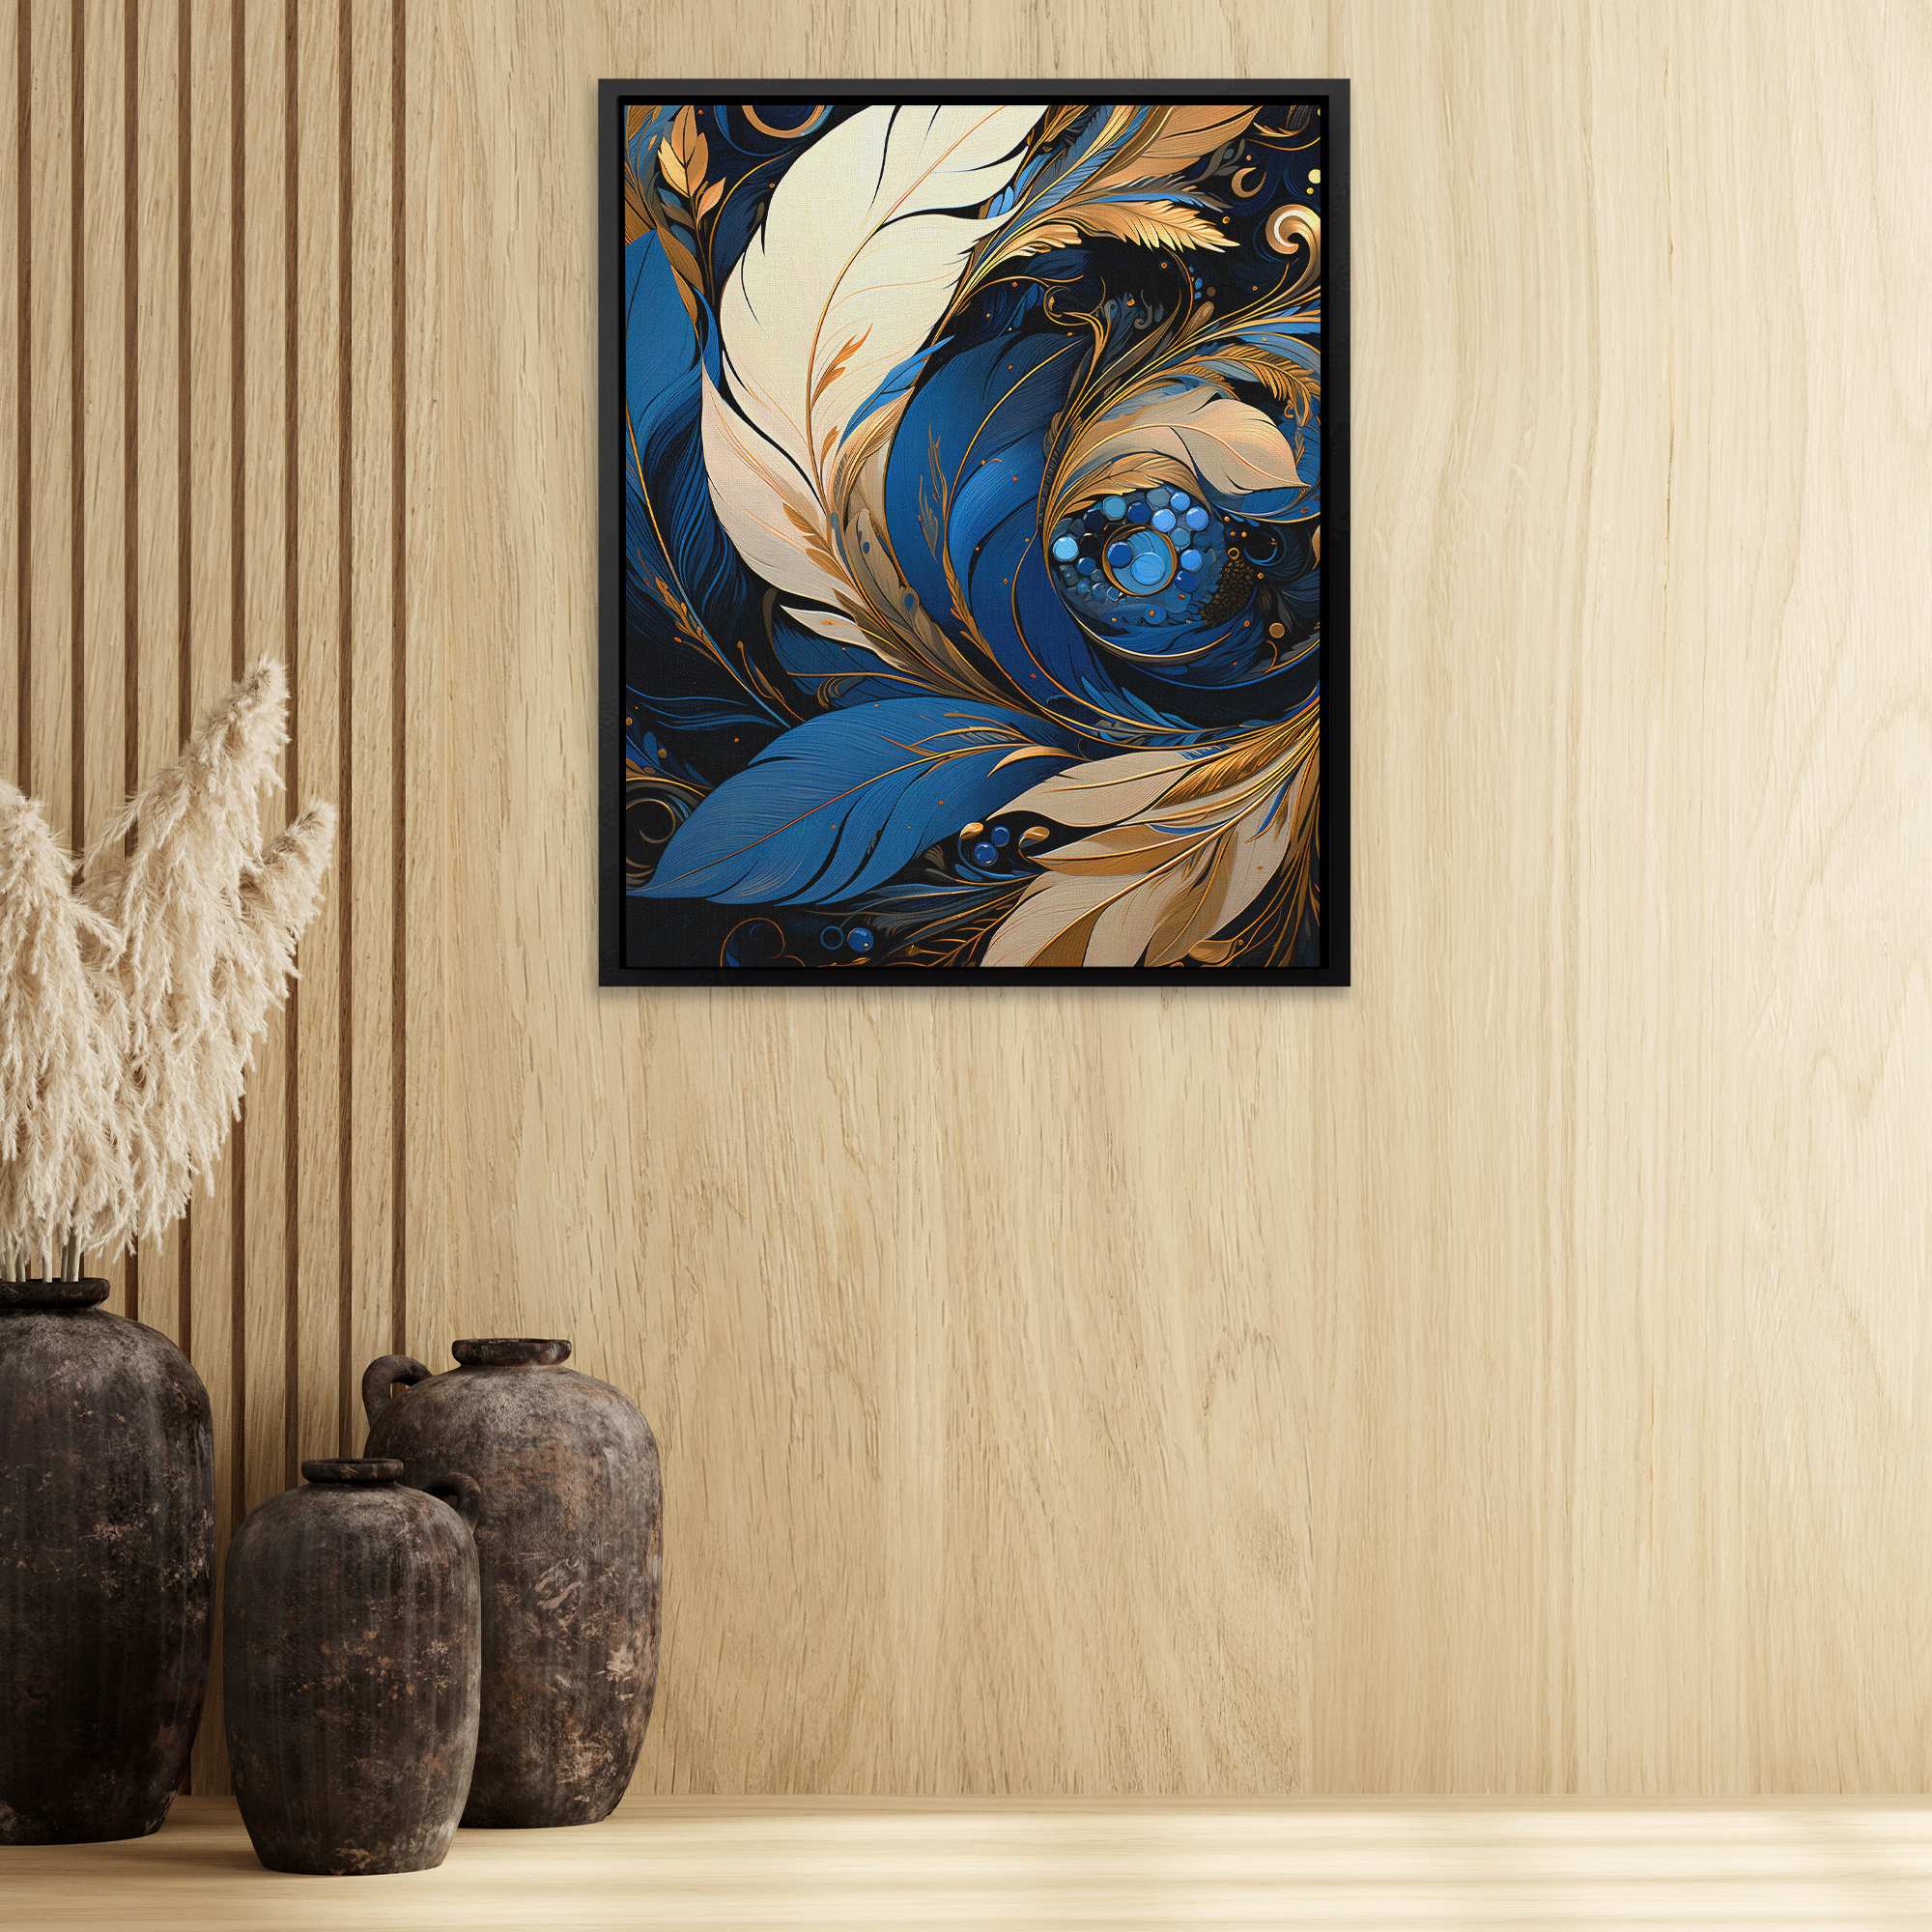 Blue, Gold, and White Art Collection